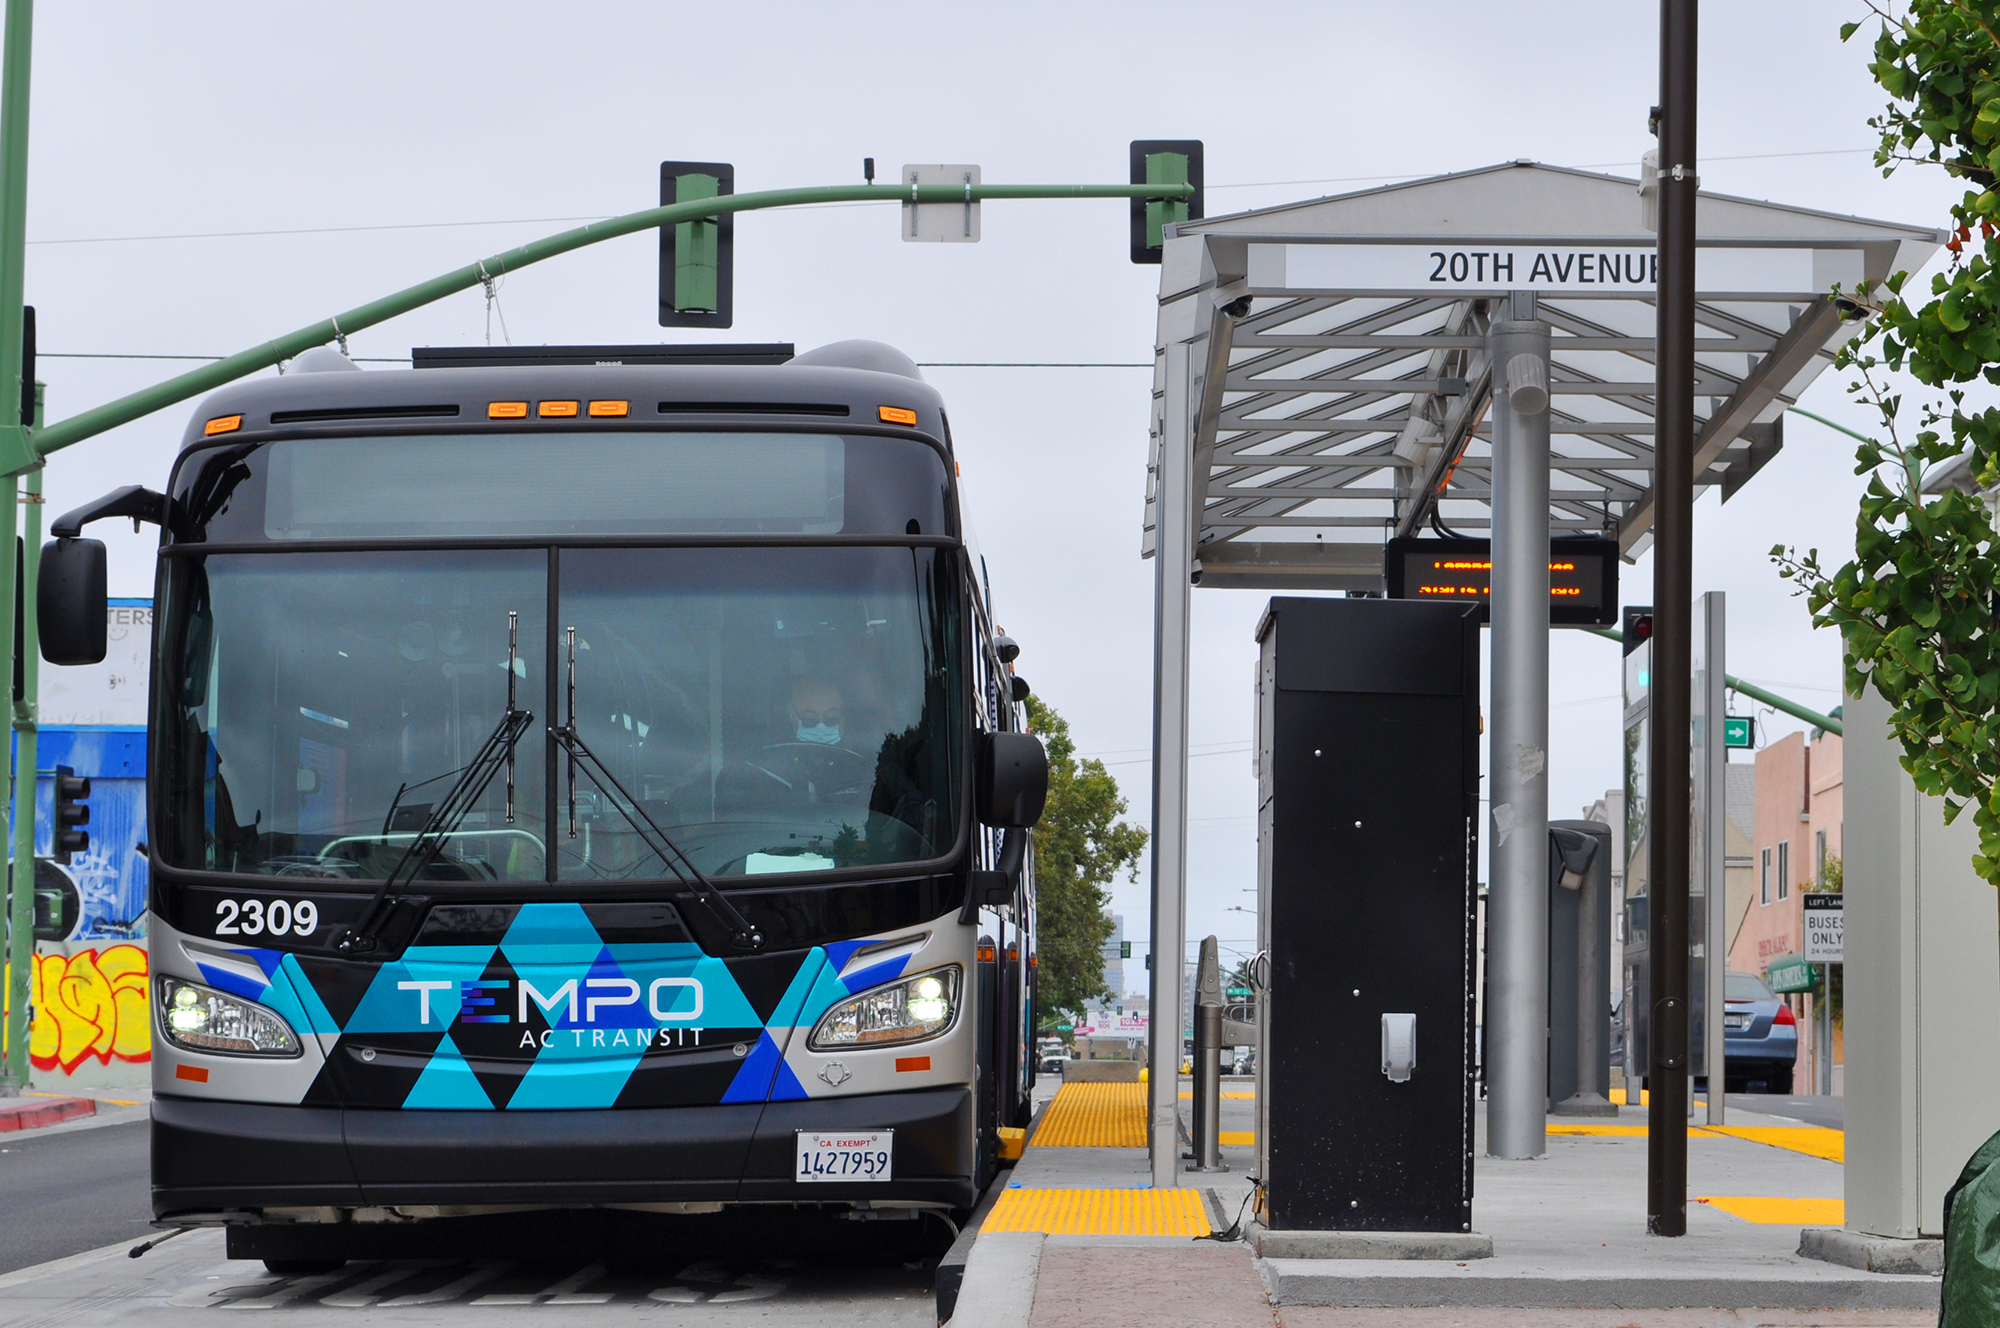 Tempo Bus Front & Station – 20th Ave